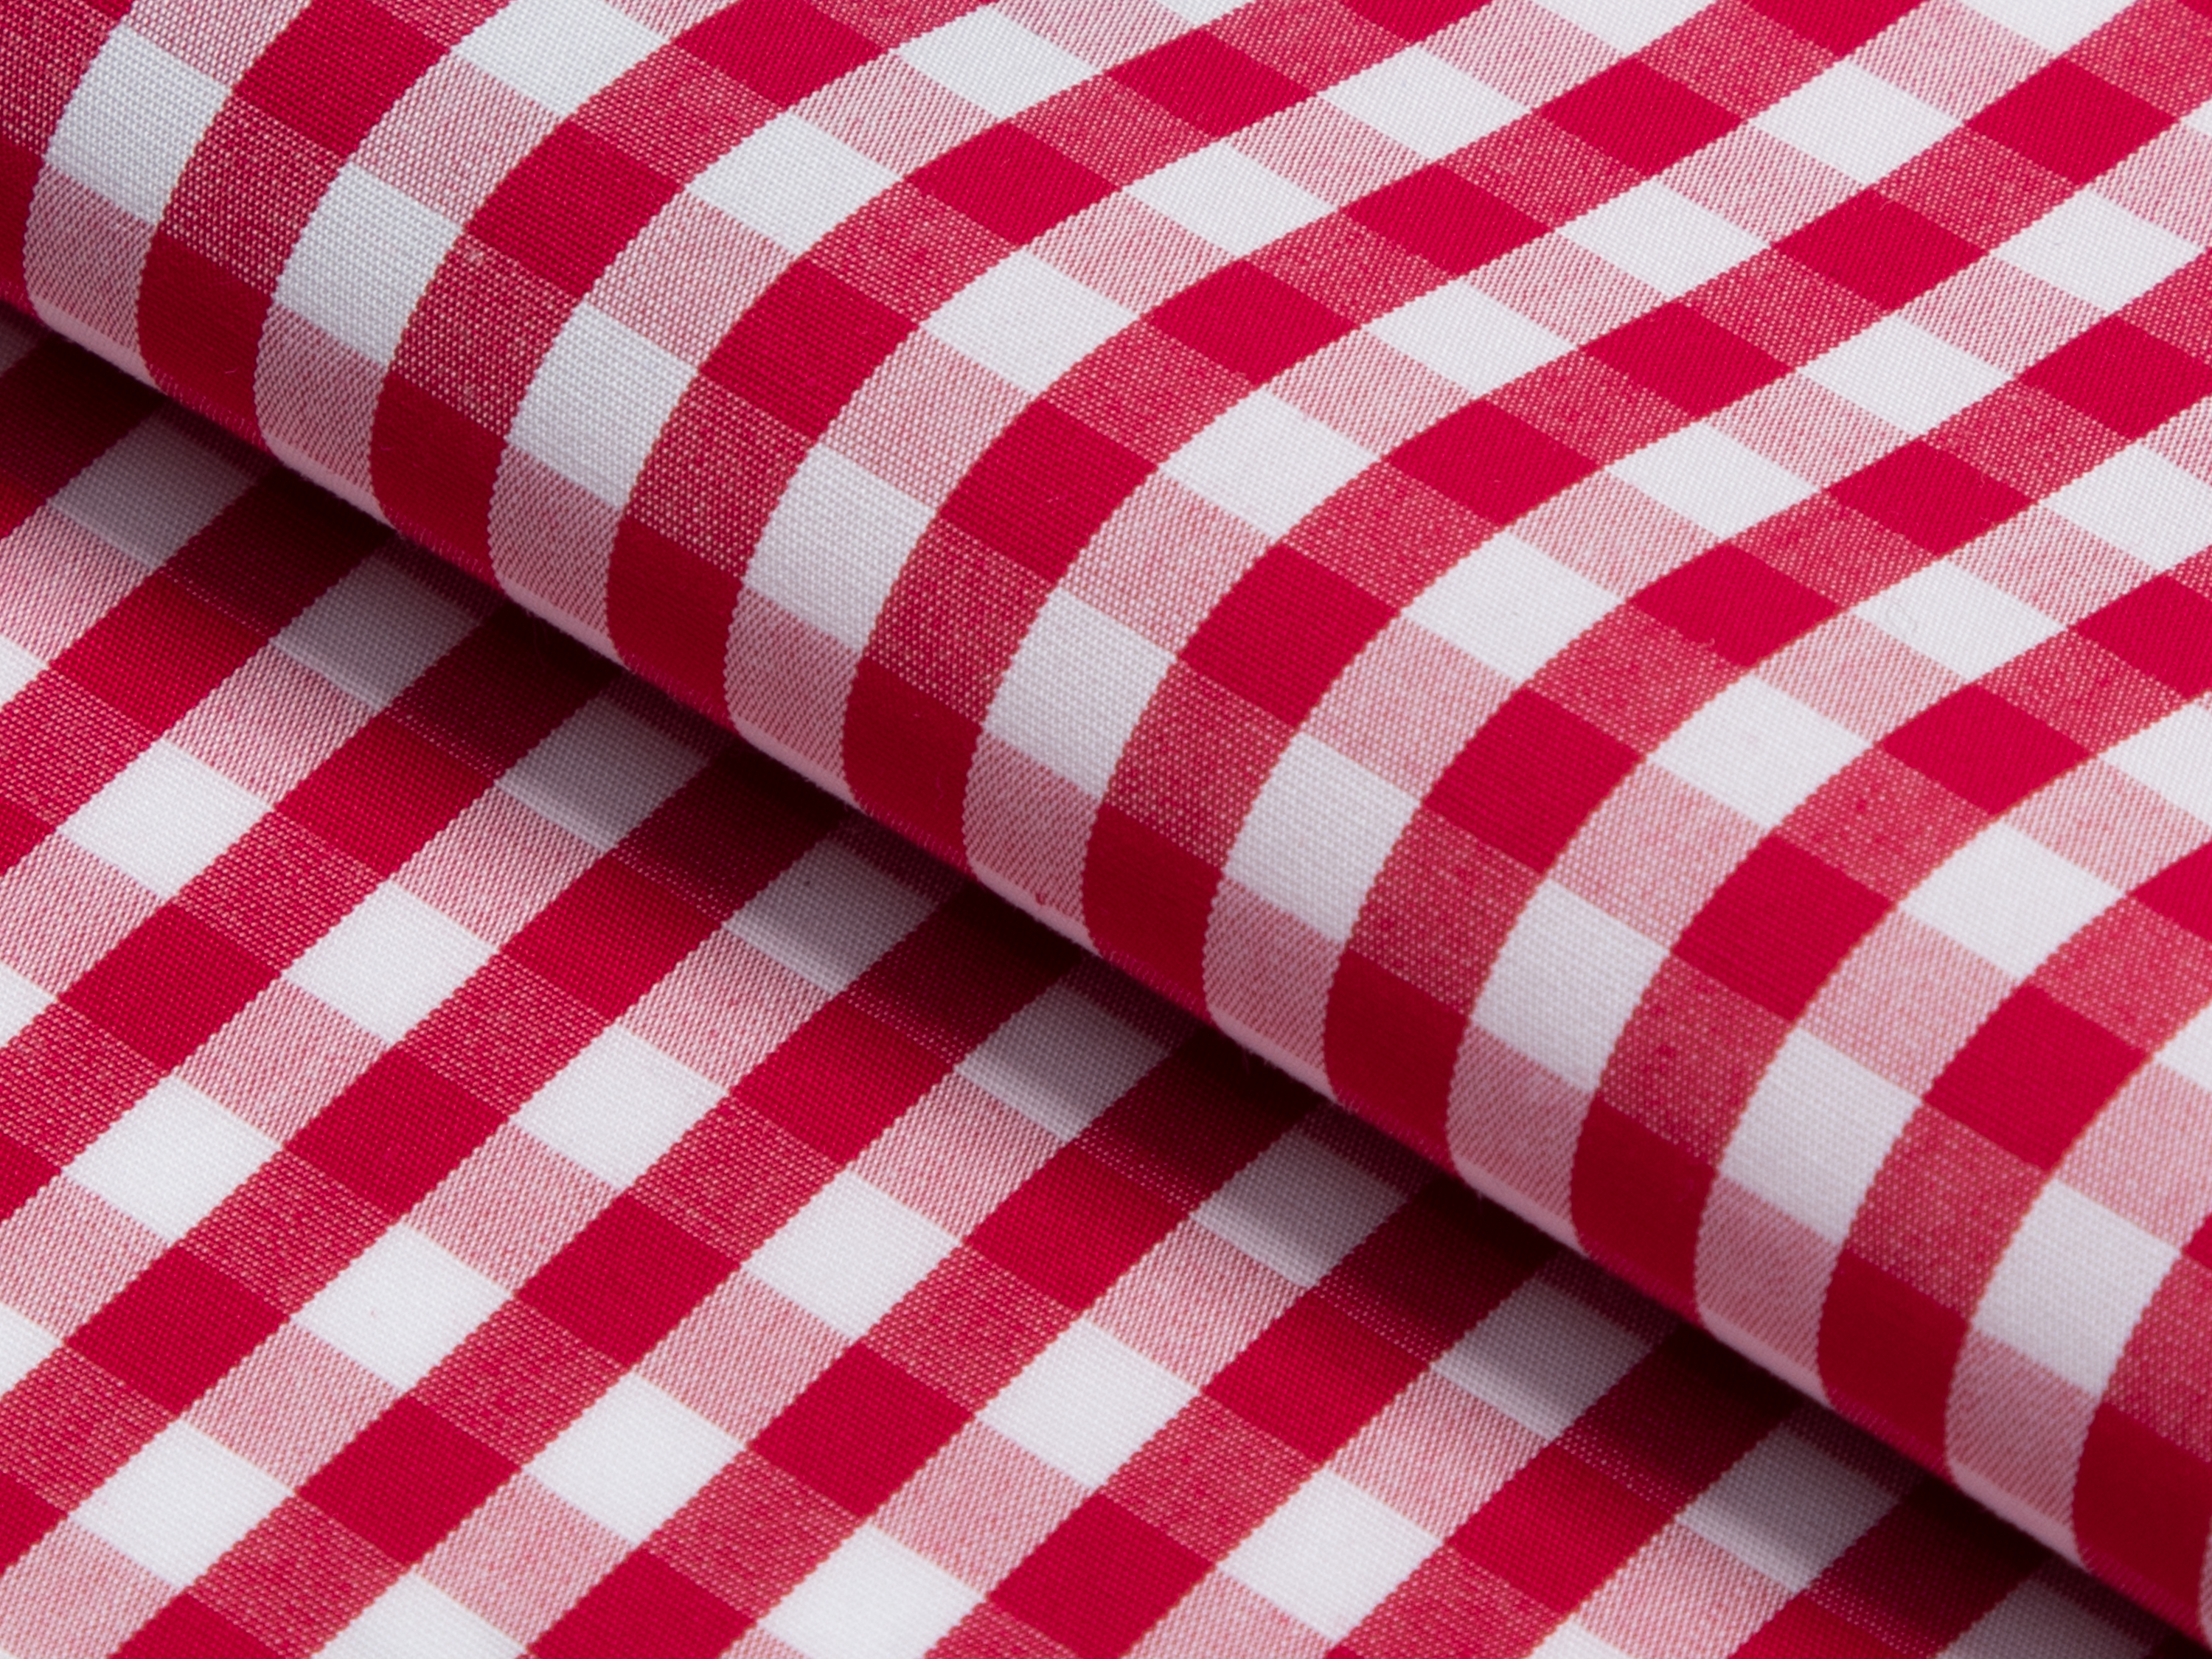 Buy tailor made shirts online -  - Gingham Red